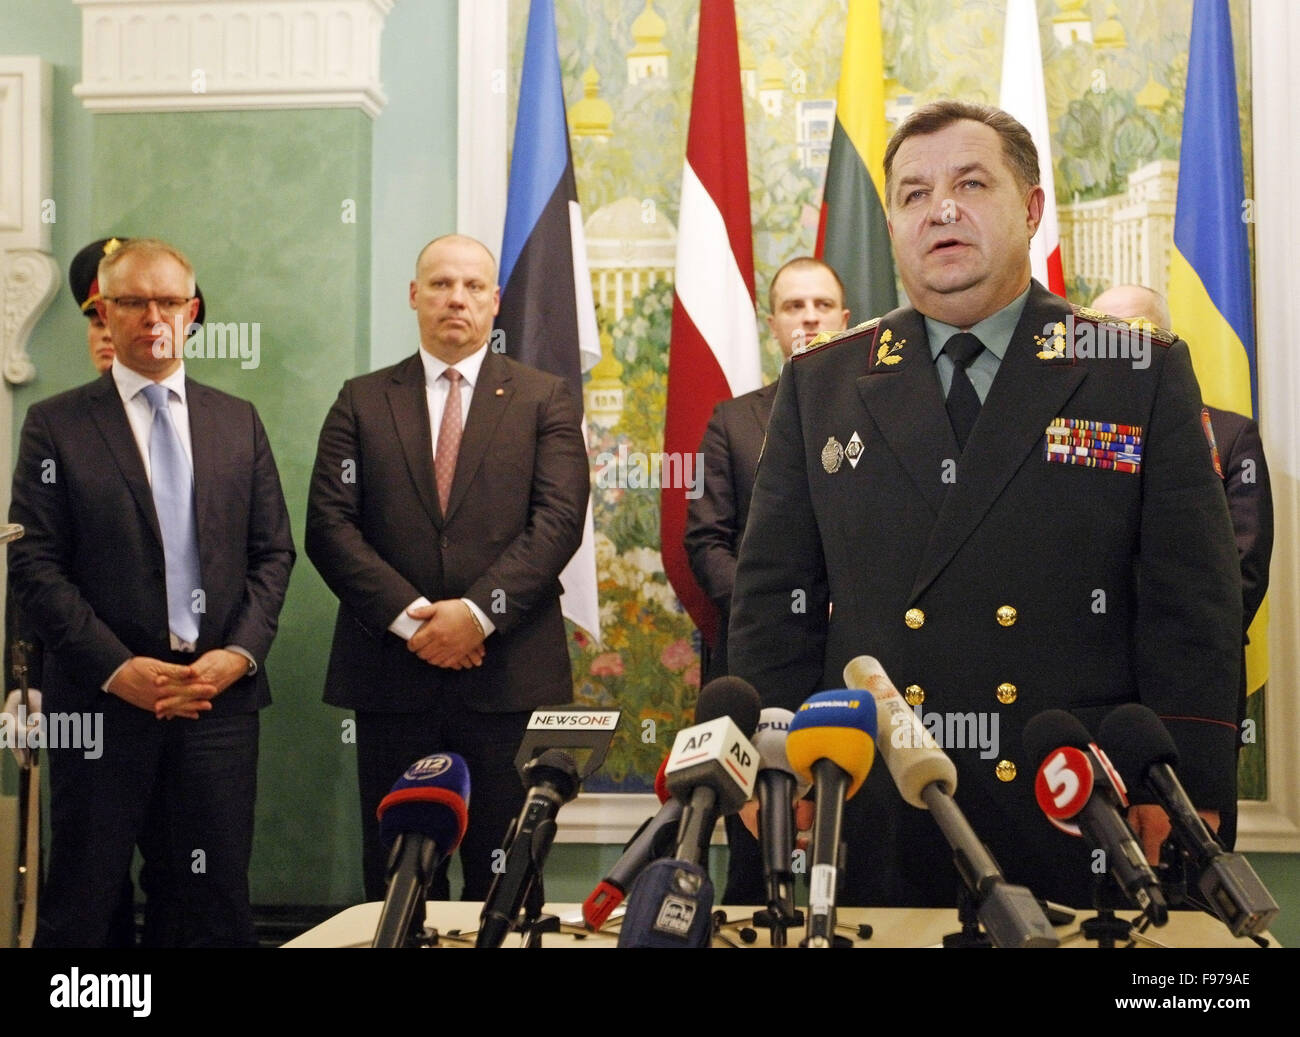 Kiev, Ukraine. 14th Dec, 2015. From left to right: Estonian Defence Minister Hannes Hanso, Latvian Defence Minister Raimonds Bergmanis, Polish Deputy Defence Minister Tomasz Szatkowsk and Ukrainian Defence Minister Stepan Poltorak speaks with the media after the signing of the Joint Statement of the Ministers of Defence of Ukraine, Poland, Estonia, Latvia, and Lithuania on the basis of the joint working meeting on the development of cooperation in the defense sphere. © Vasyl Shevchenko/Pacific Press/Alamy Live News Stock Photo